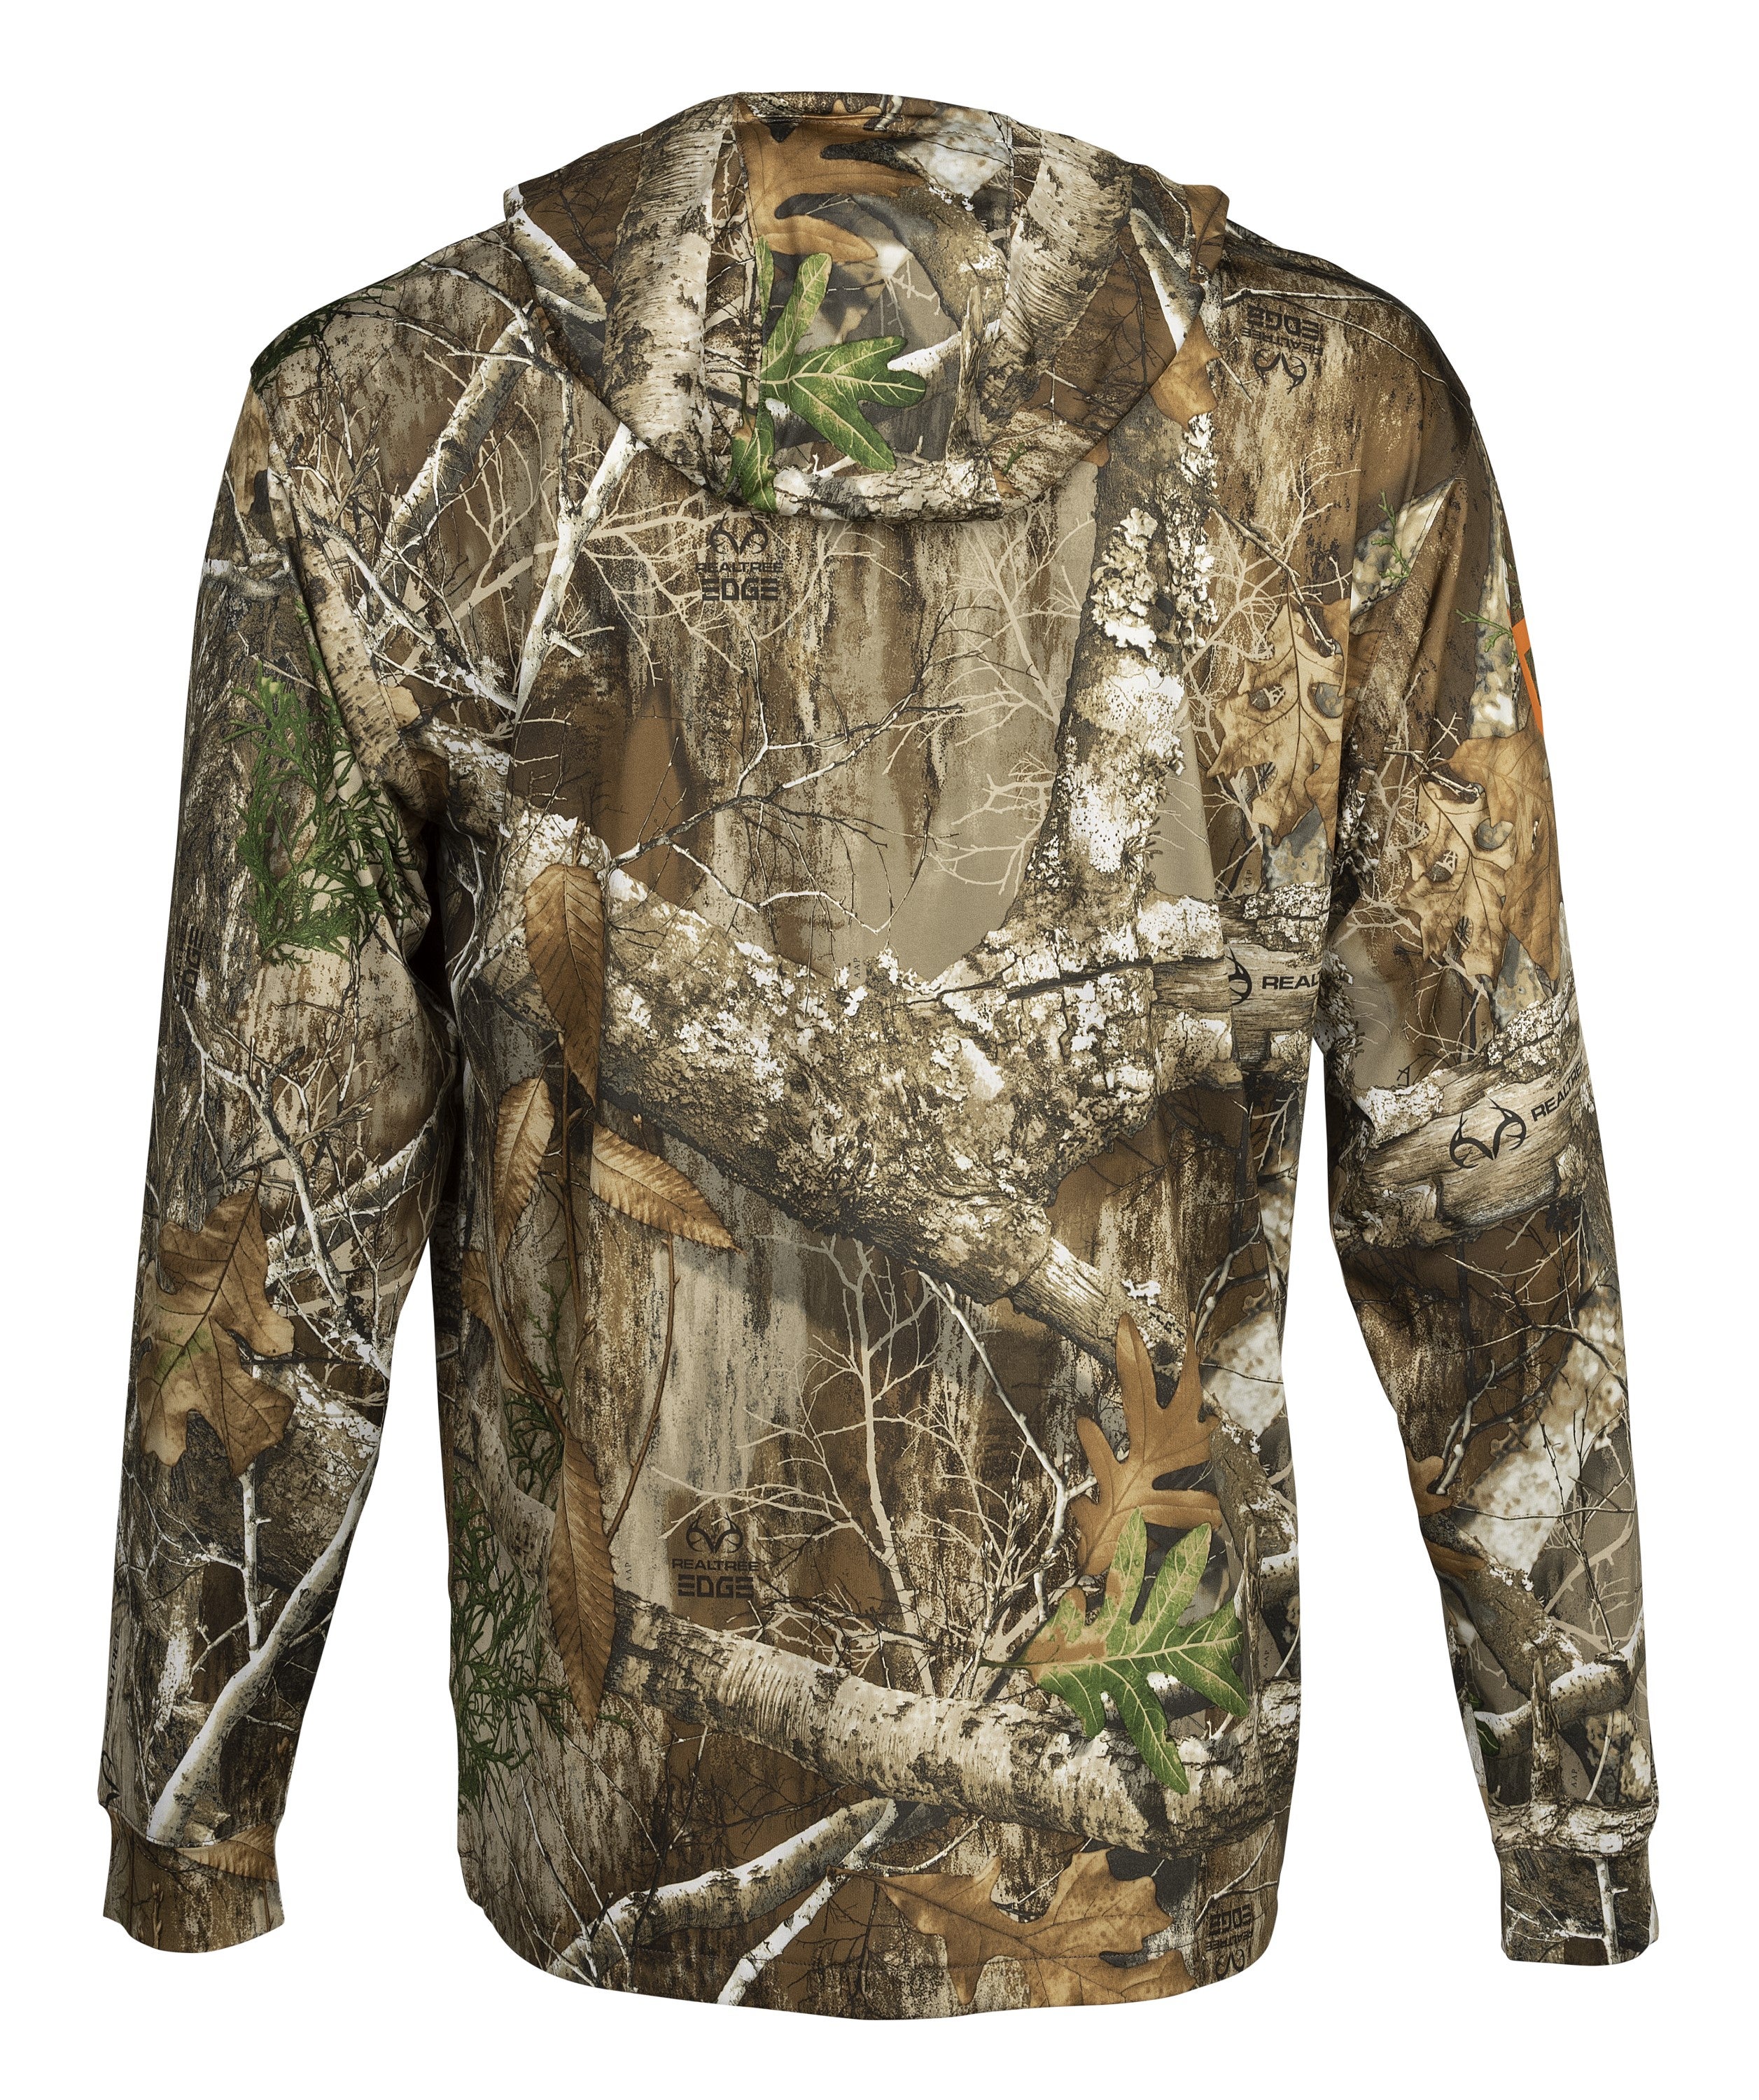 https://www.browning.com/content/dam/browning/product/clothing/2023/browning-hooded-long-sleeve-tech-shirt/Browning-Hooded-Long-Sleeve-Tech-Shirt-30107260-4.jpg?width=835&auto=webp&quality=75